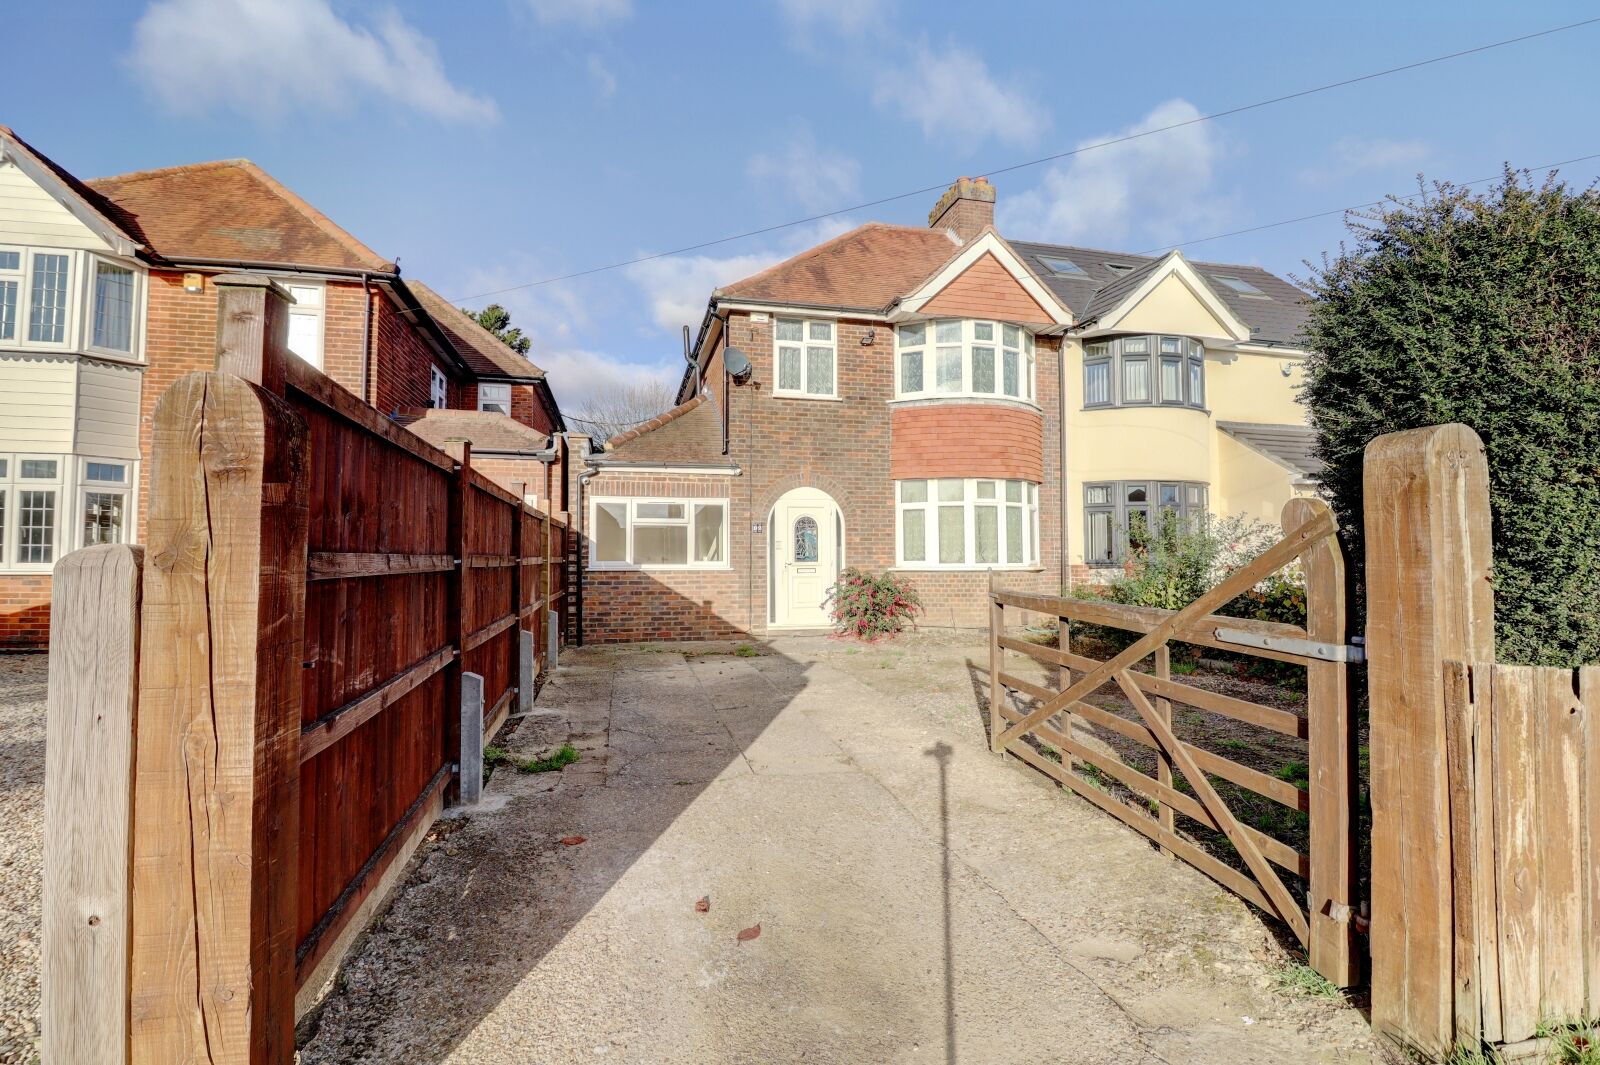 4 bedroom semi detached house for sale Cressex Road, High Wycombe, HP12, main image